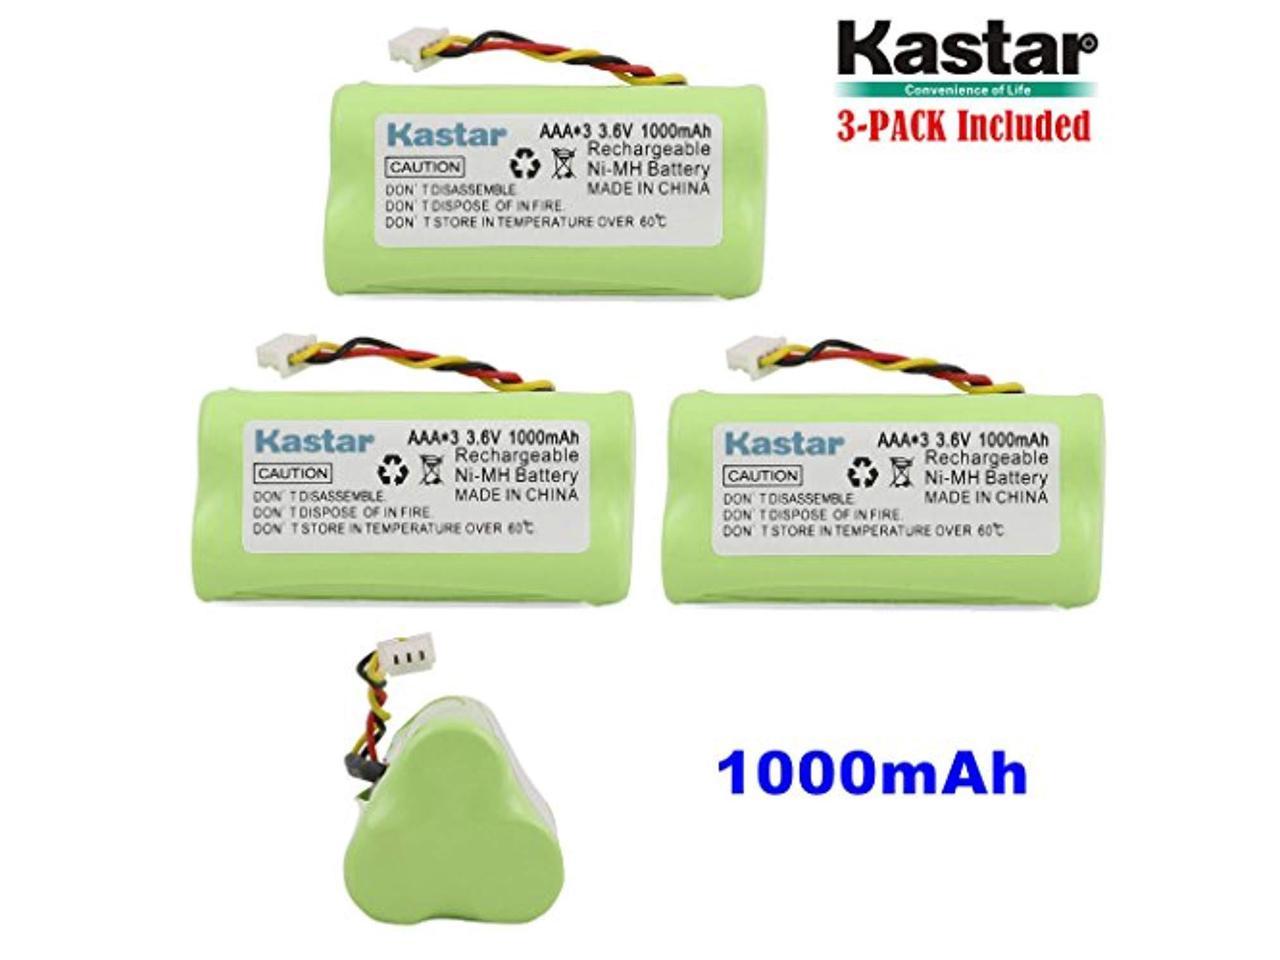 Kastar 6-Pack AAA 3.6V 1000mAh Ni-MH Rechargeable Battery Replacement for Zebra/Motorola Symbol 82-67705-01 Symbol LS-4278 LS4278-M BTRY-LS42RAAOE-01 DS-6878 Cordless Bluetooth Laser Barcode Scanner 